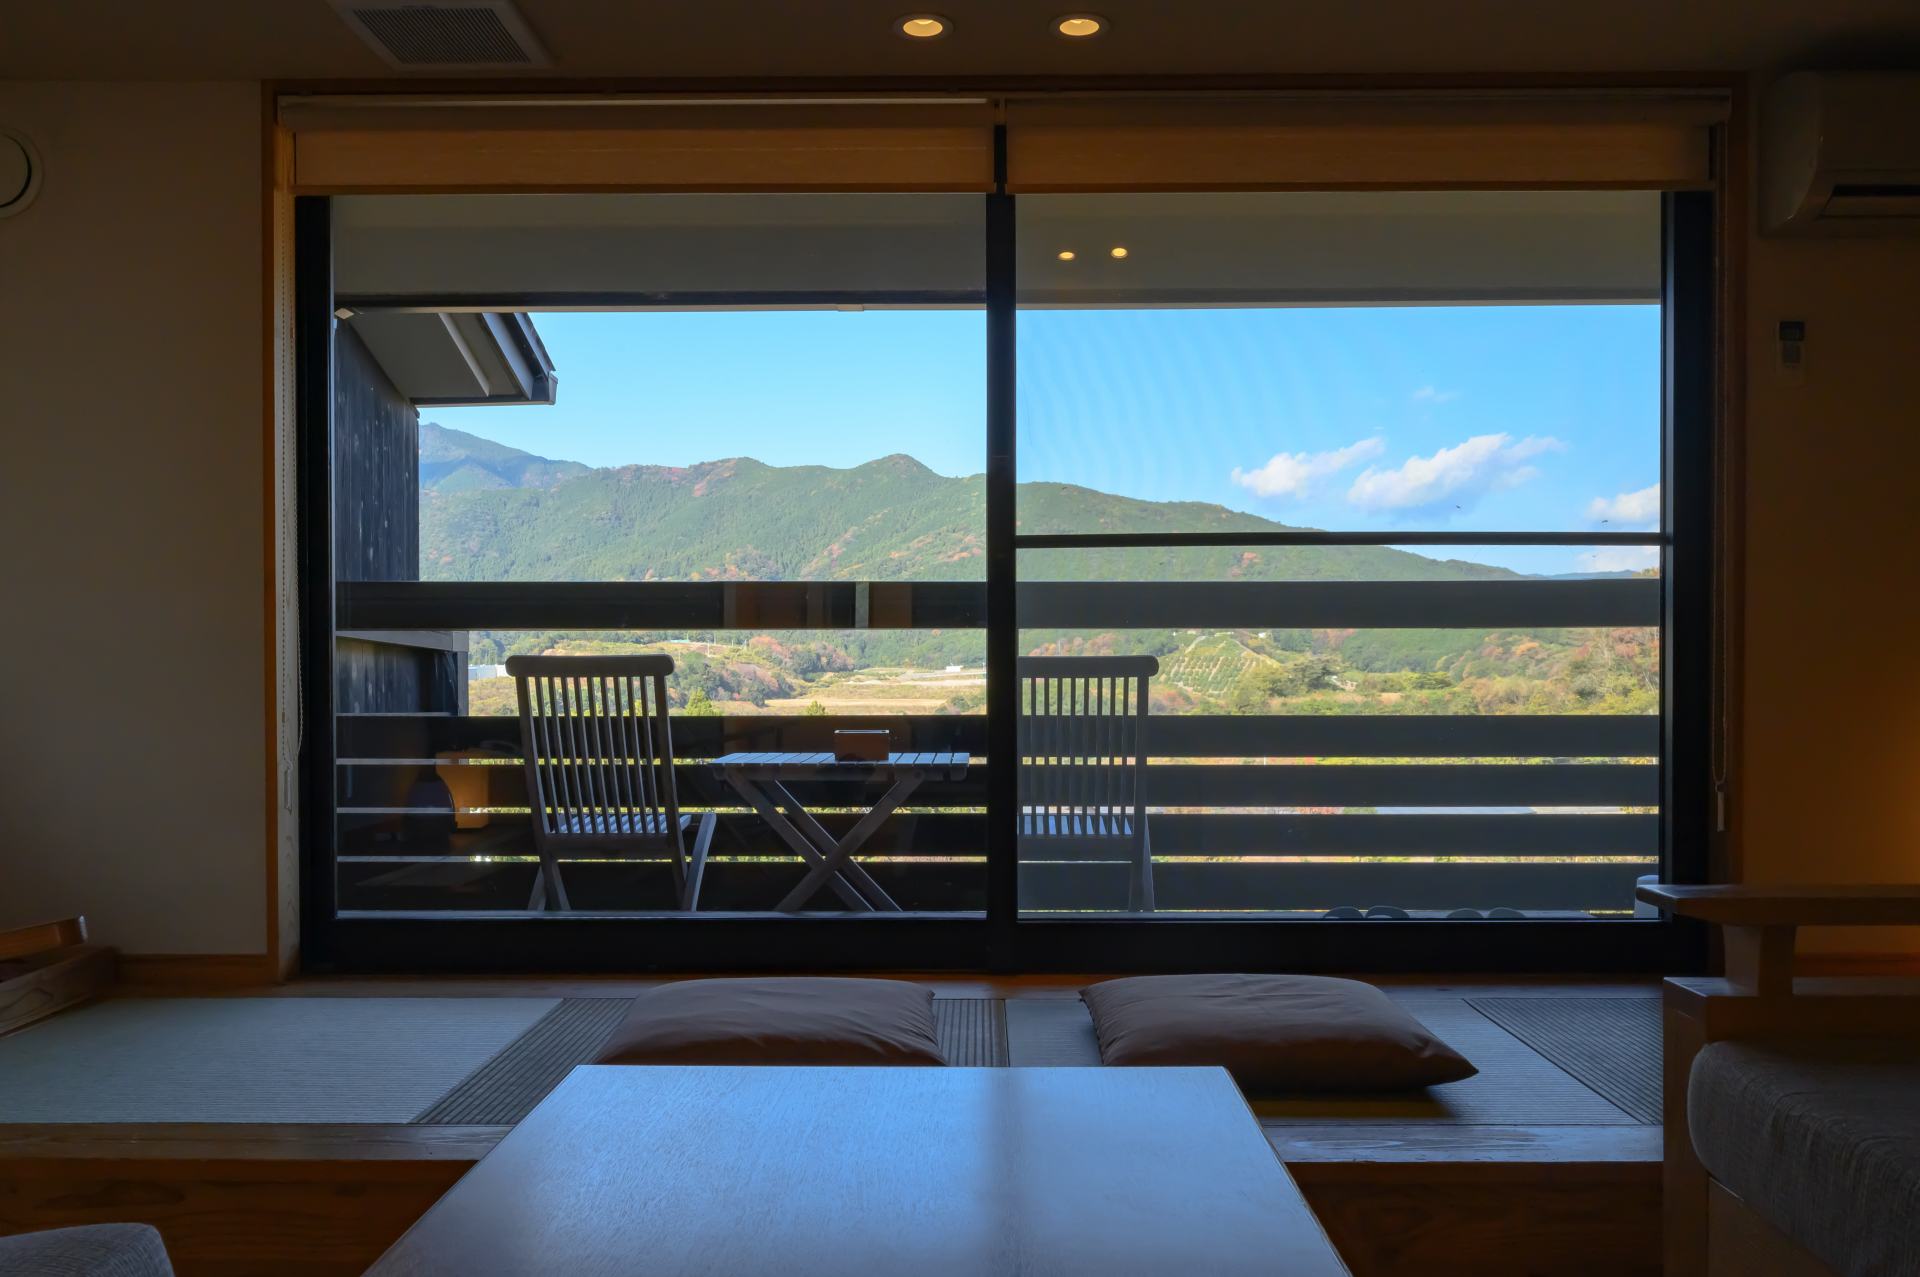 Ideal for a stay for two, the 'Suzaku' room comes highly recommended, featuring a terrace with a private open-air bath.